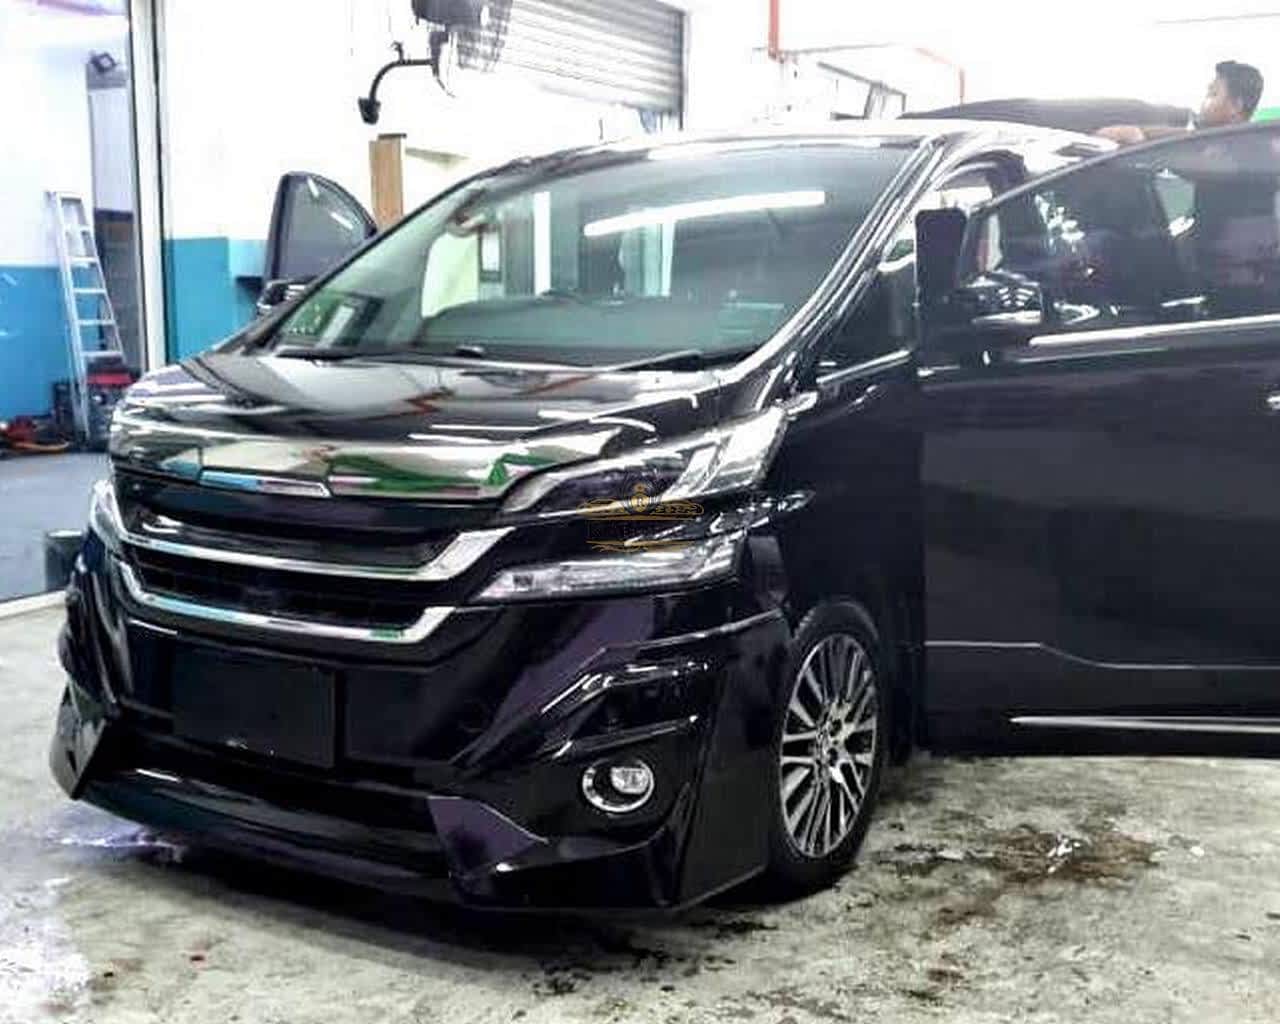 Rent a Toyota Vellfire Full Spec Near me - Luxury Car Rental by Rglobal Car Rental Services